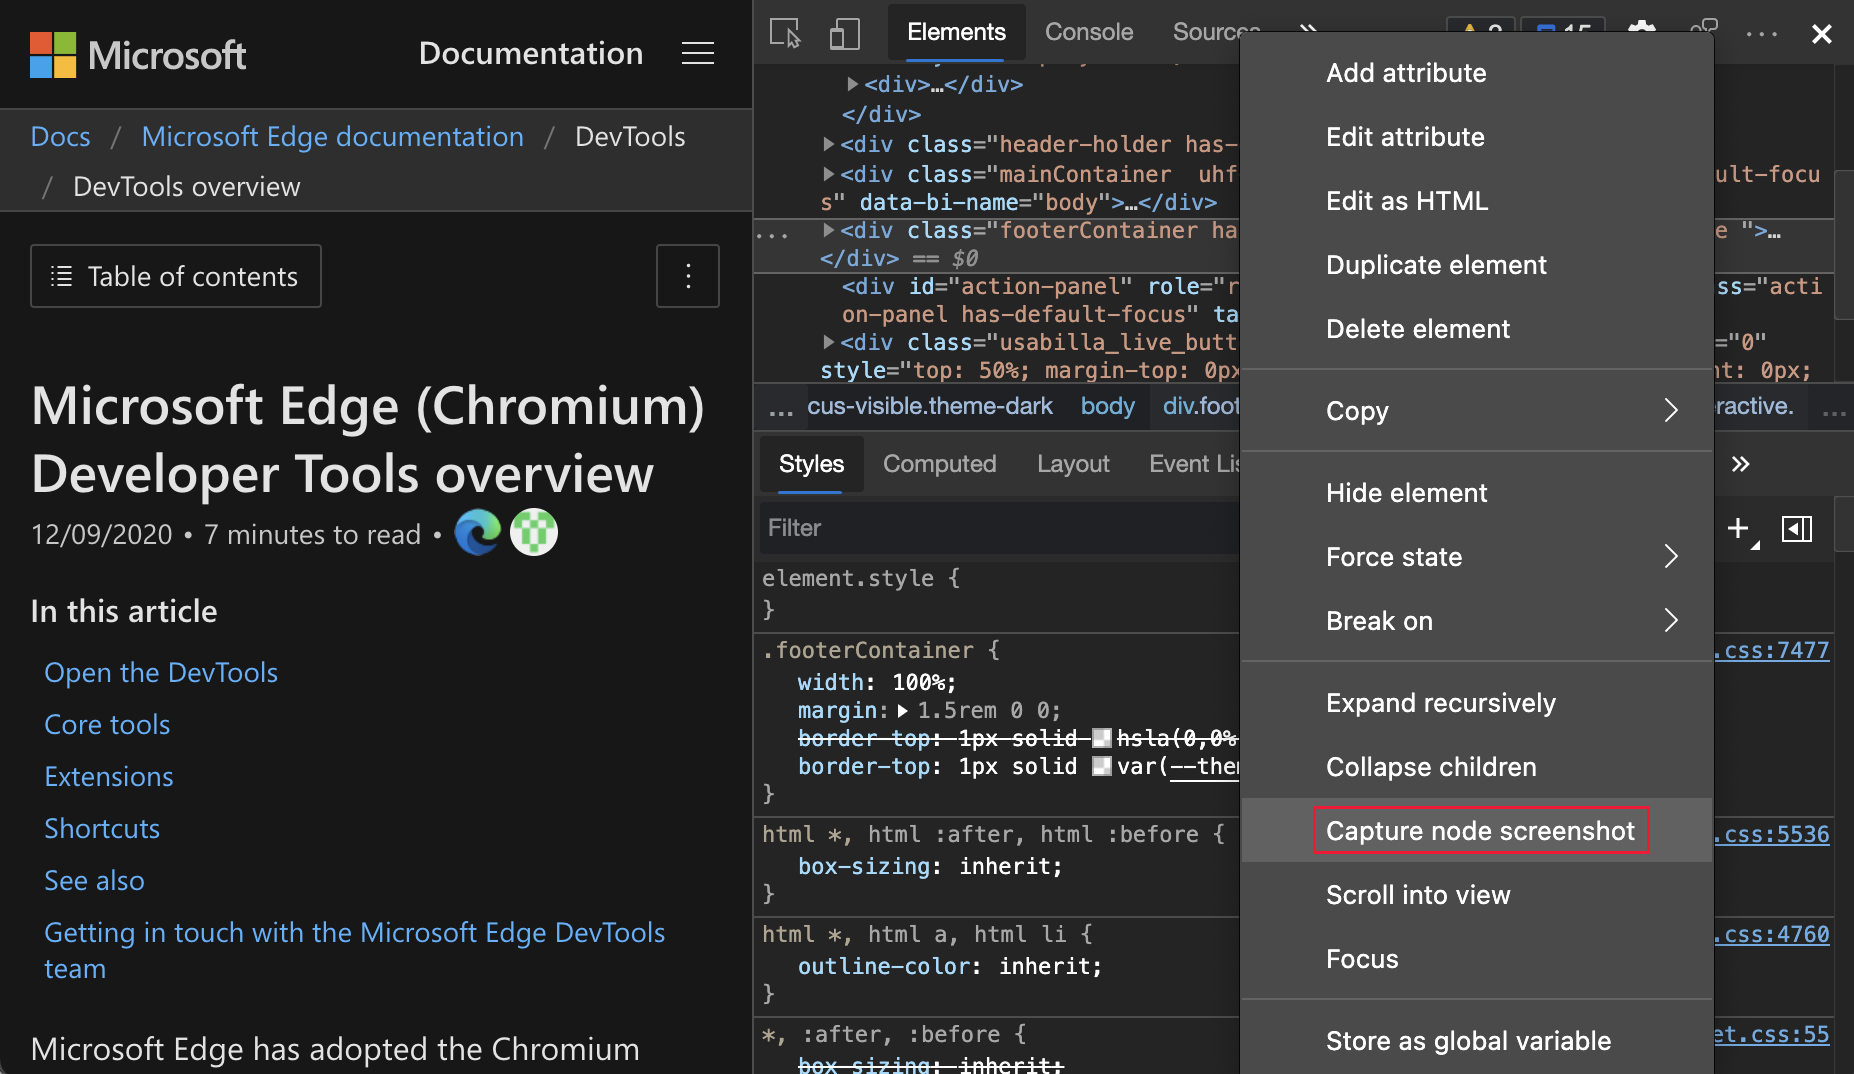 Capture node screenshot highlighted on the context menu in the Elements tool